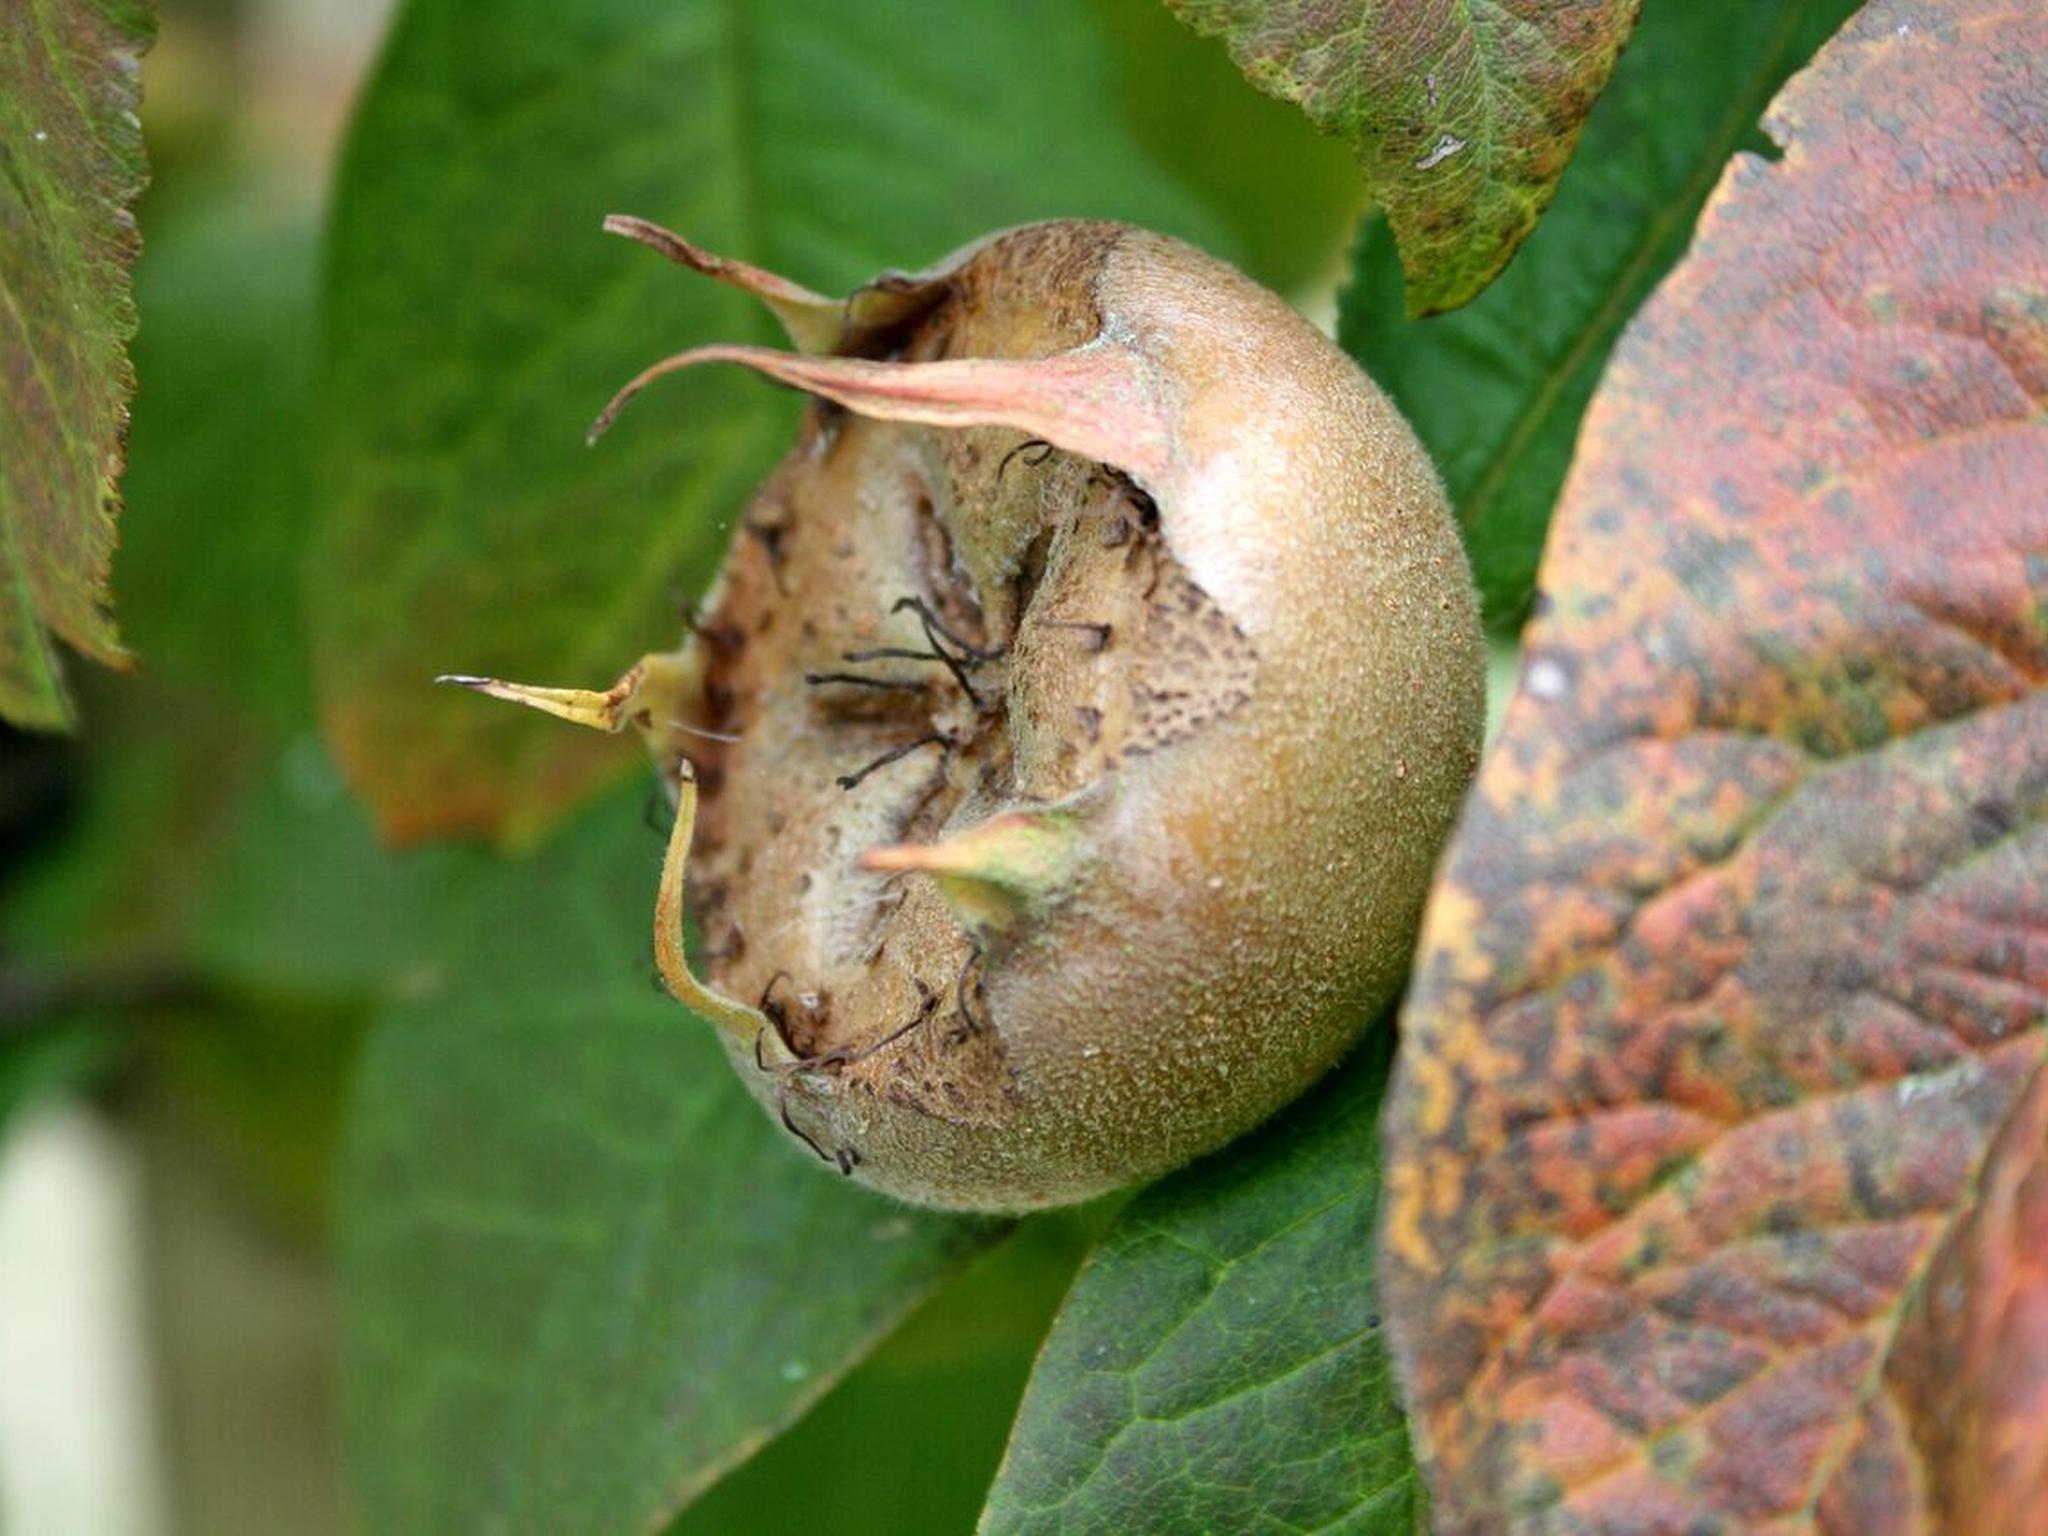 The much maligned medlar isn’t going to win any beauty contests any time soon